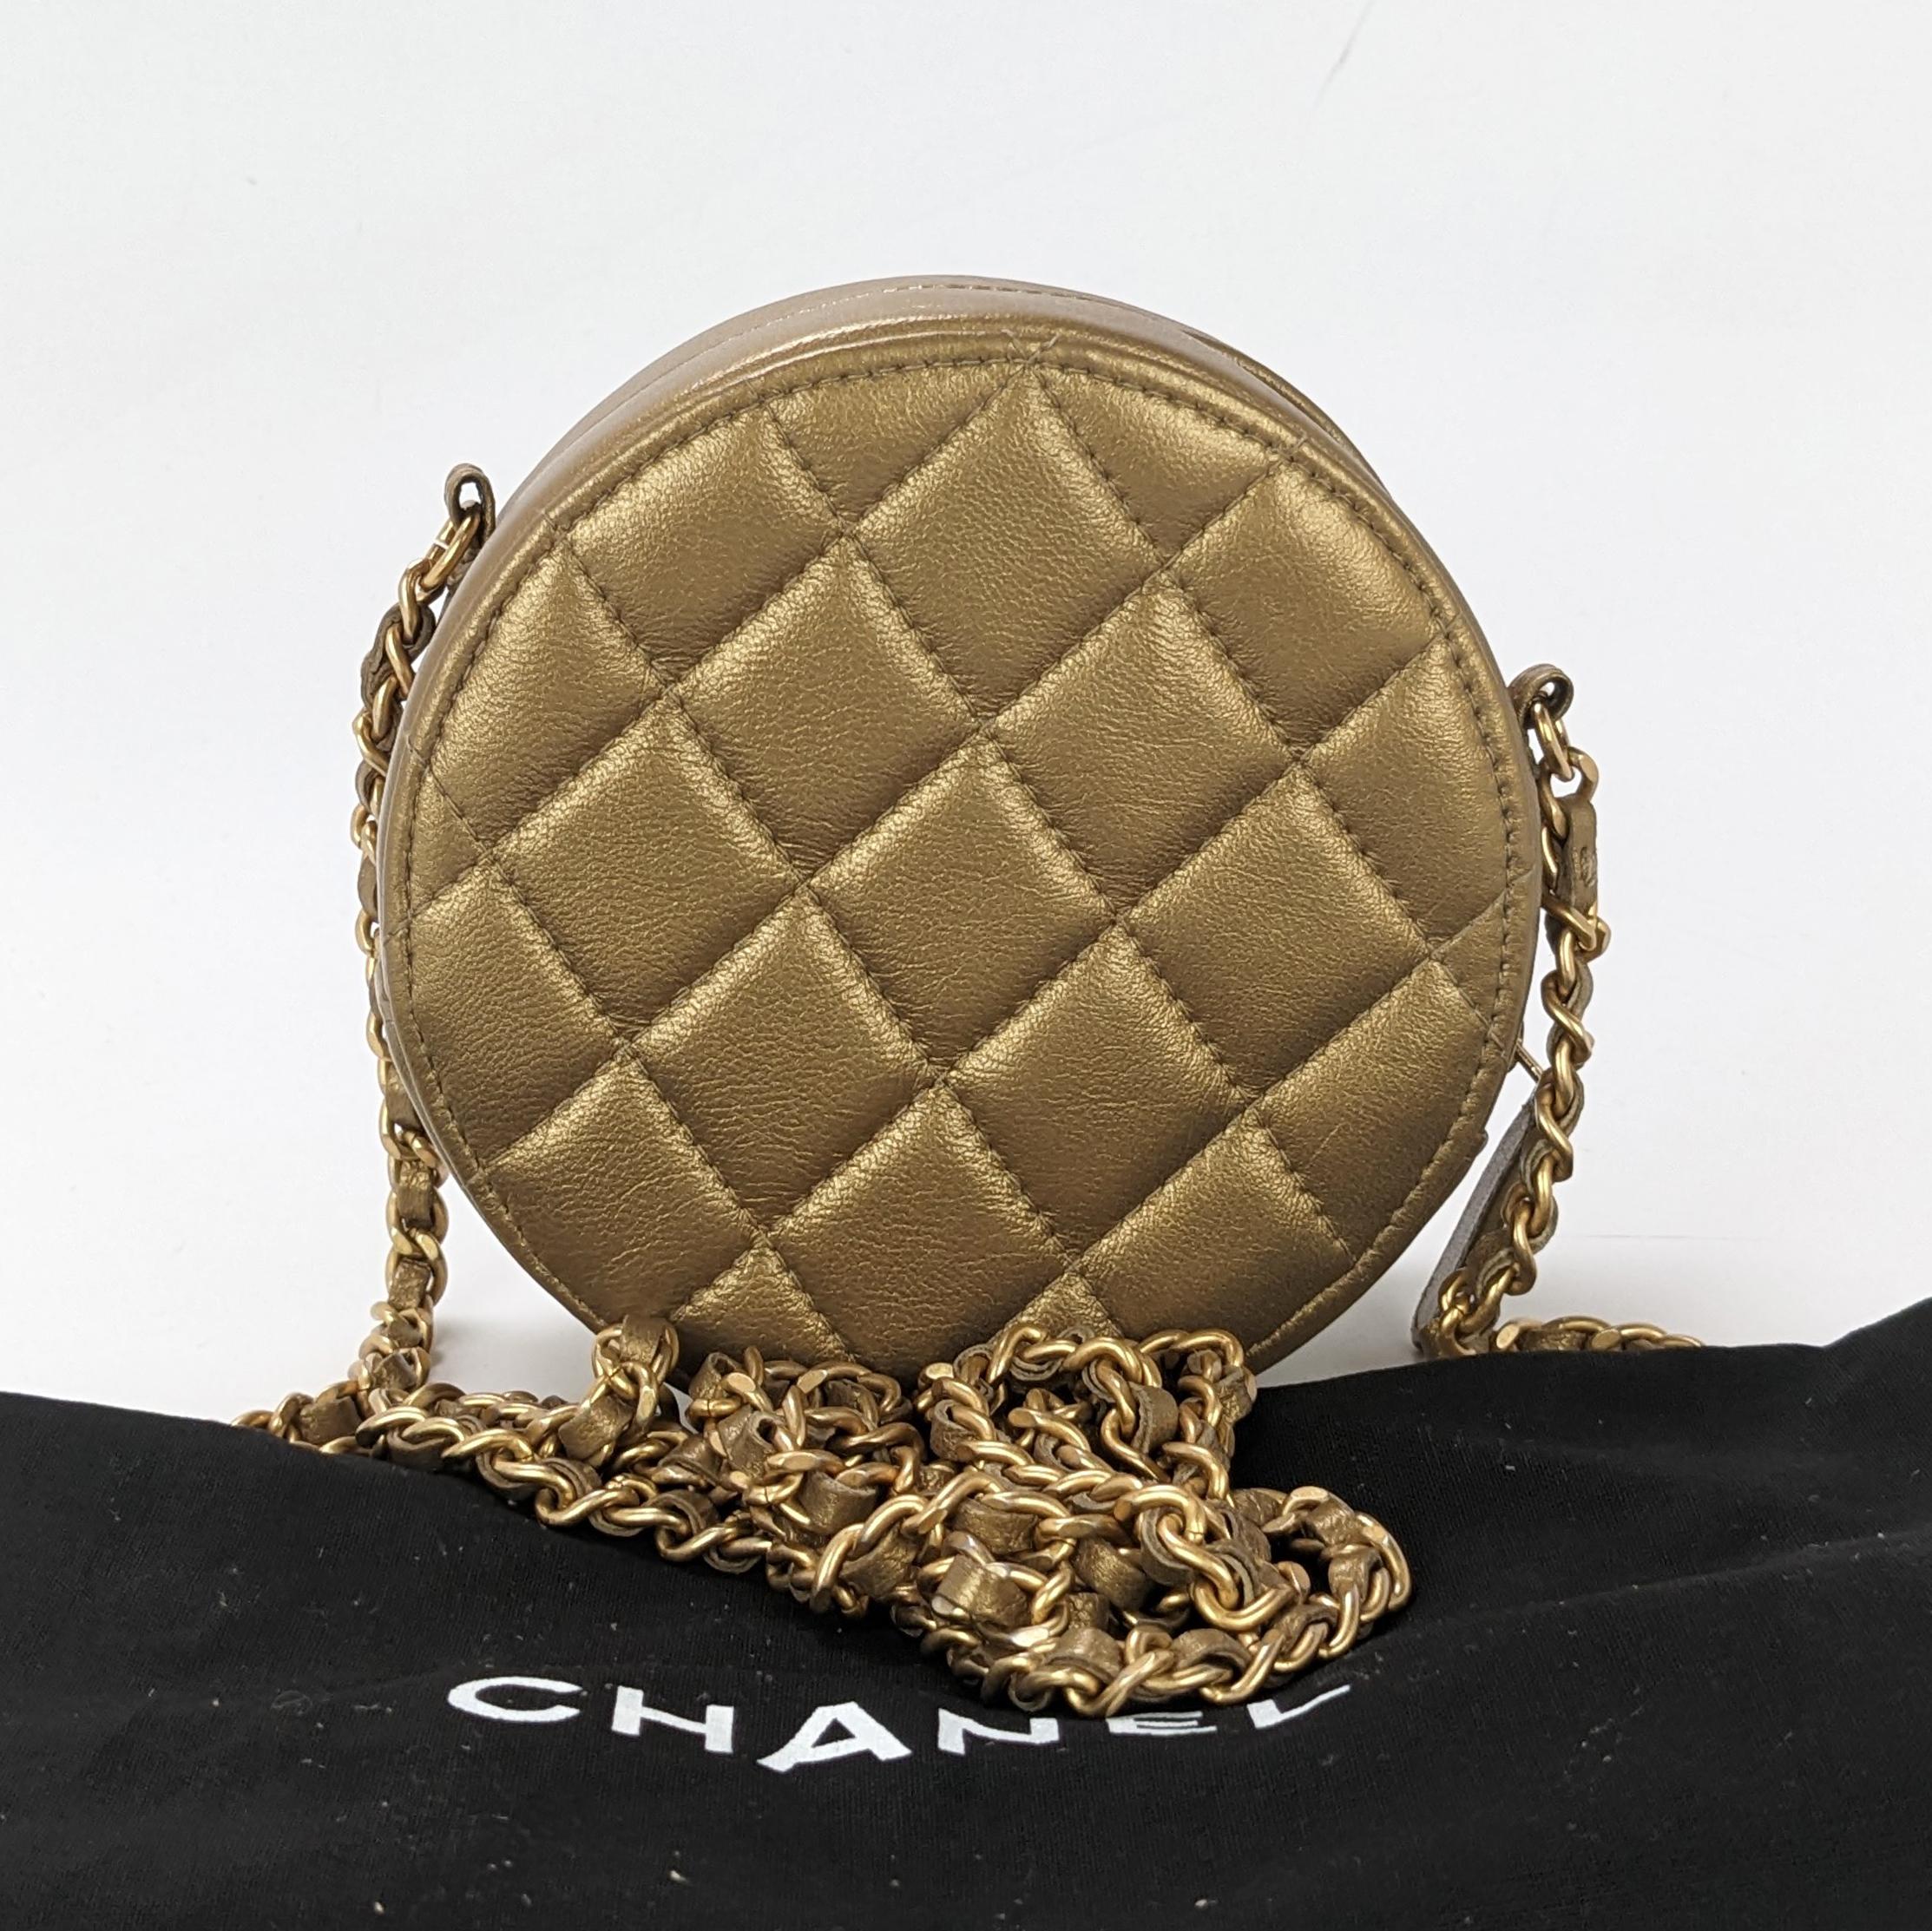 Condition: This authentic Chanel bag is in excellent pre-loved condition. There are very light scratches to the hardware and slight dryness to leather on strap.

Est. Retail: $3000

Includes: Dust bag

Features: Gold amulet adornments, chain leather